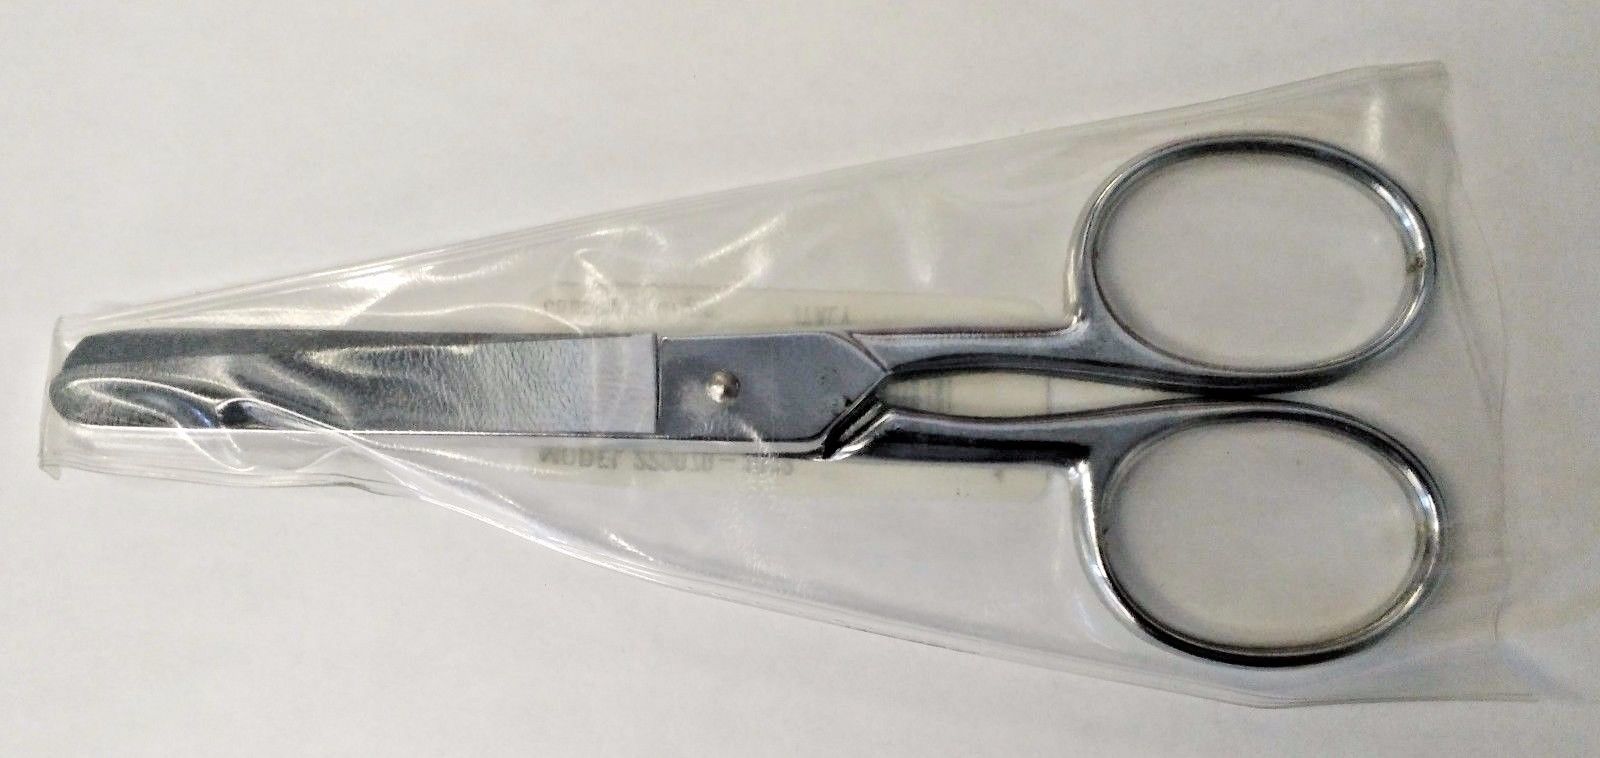 Gingher 220070-1002 6" Large Handle Pocket Scissors Italy